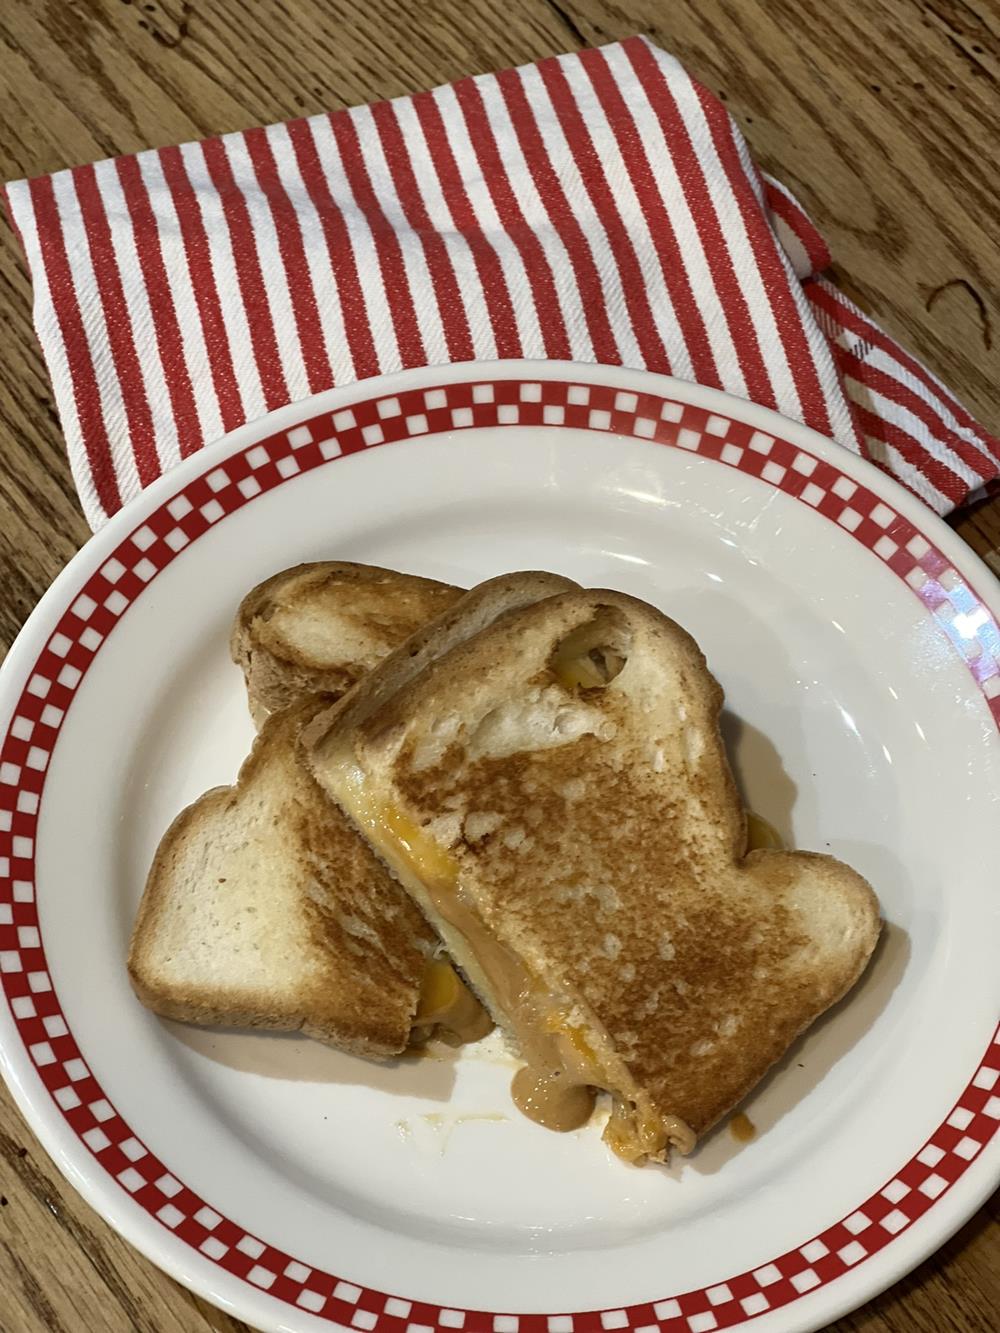 Grilled Peanut Butter and Cheese Sandwich Recipe on plate with red and white kitchen towel